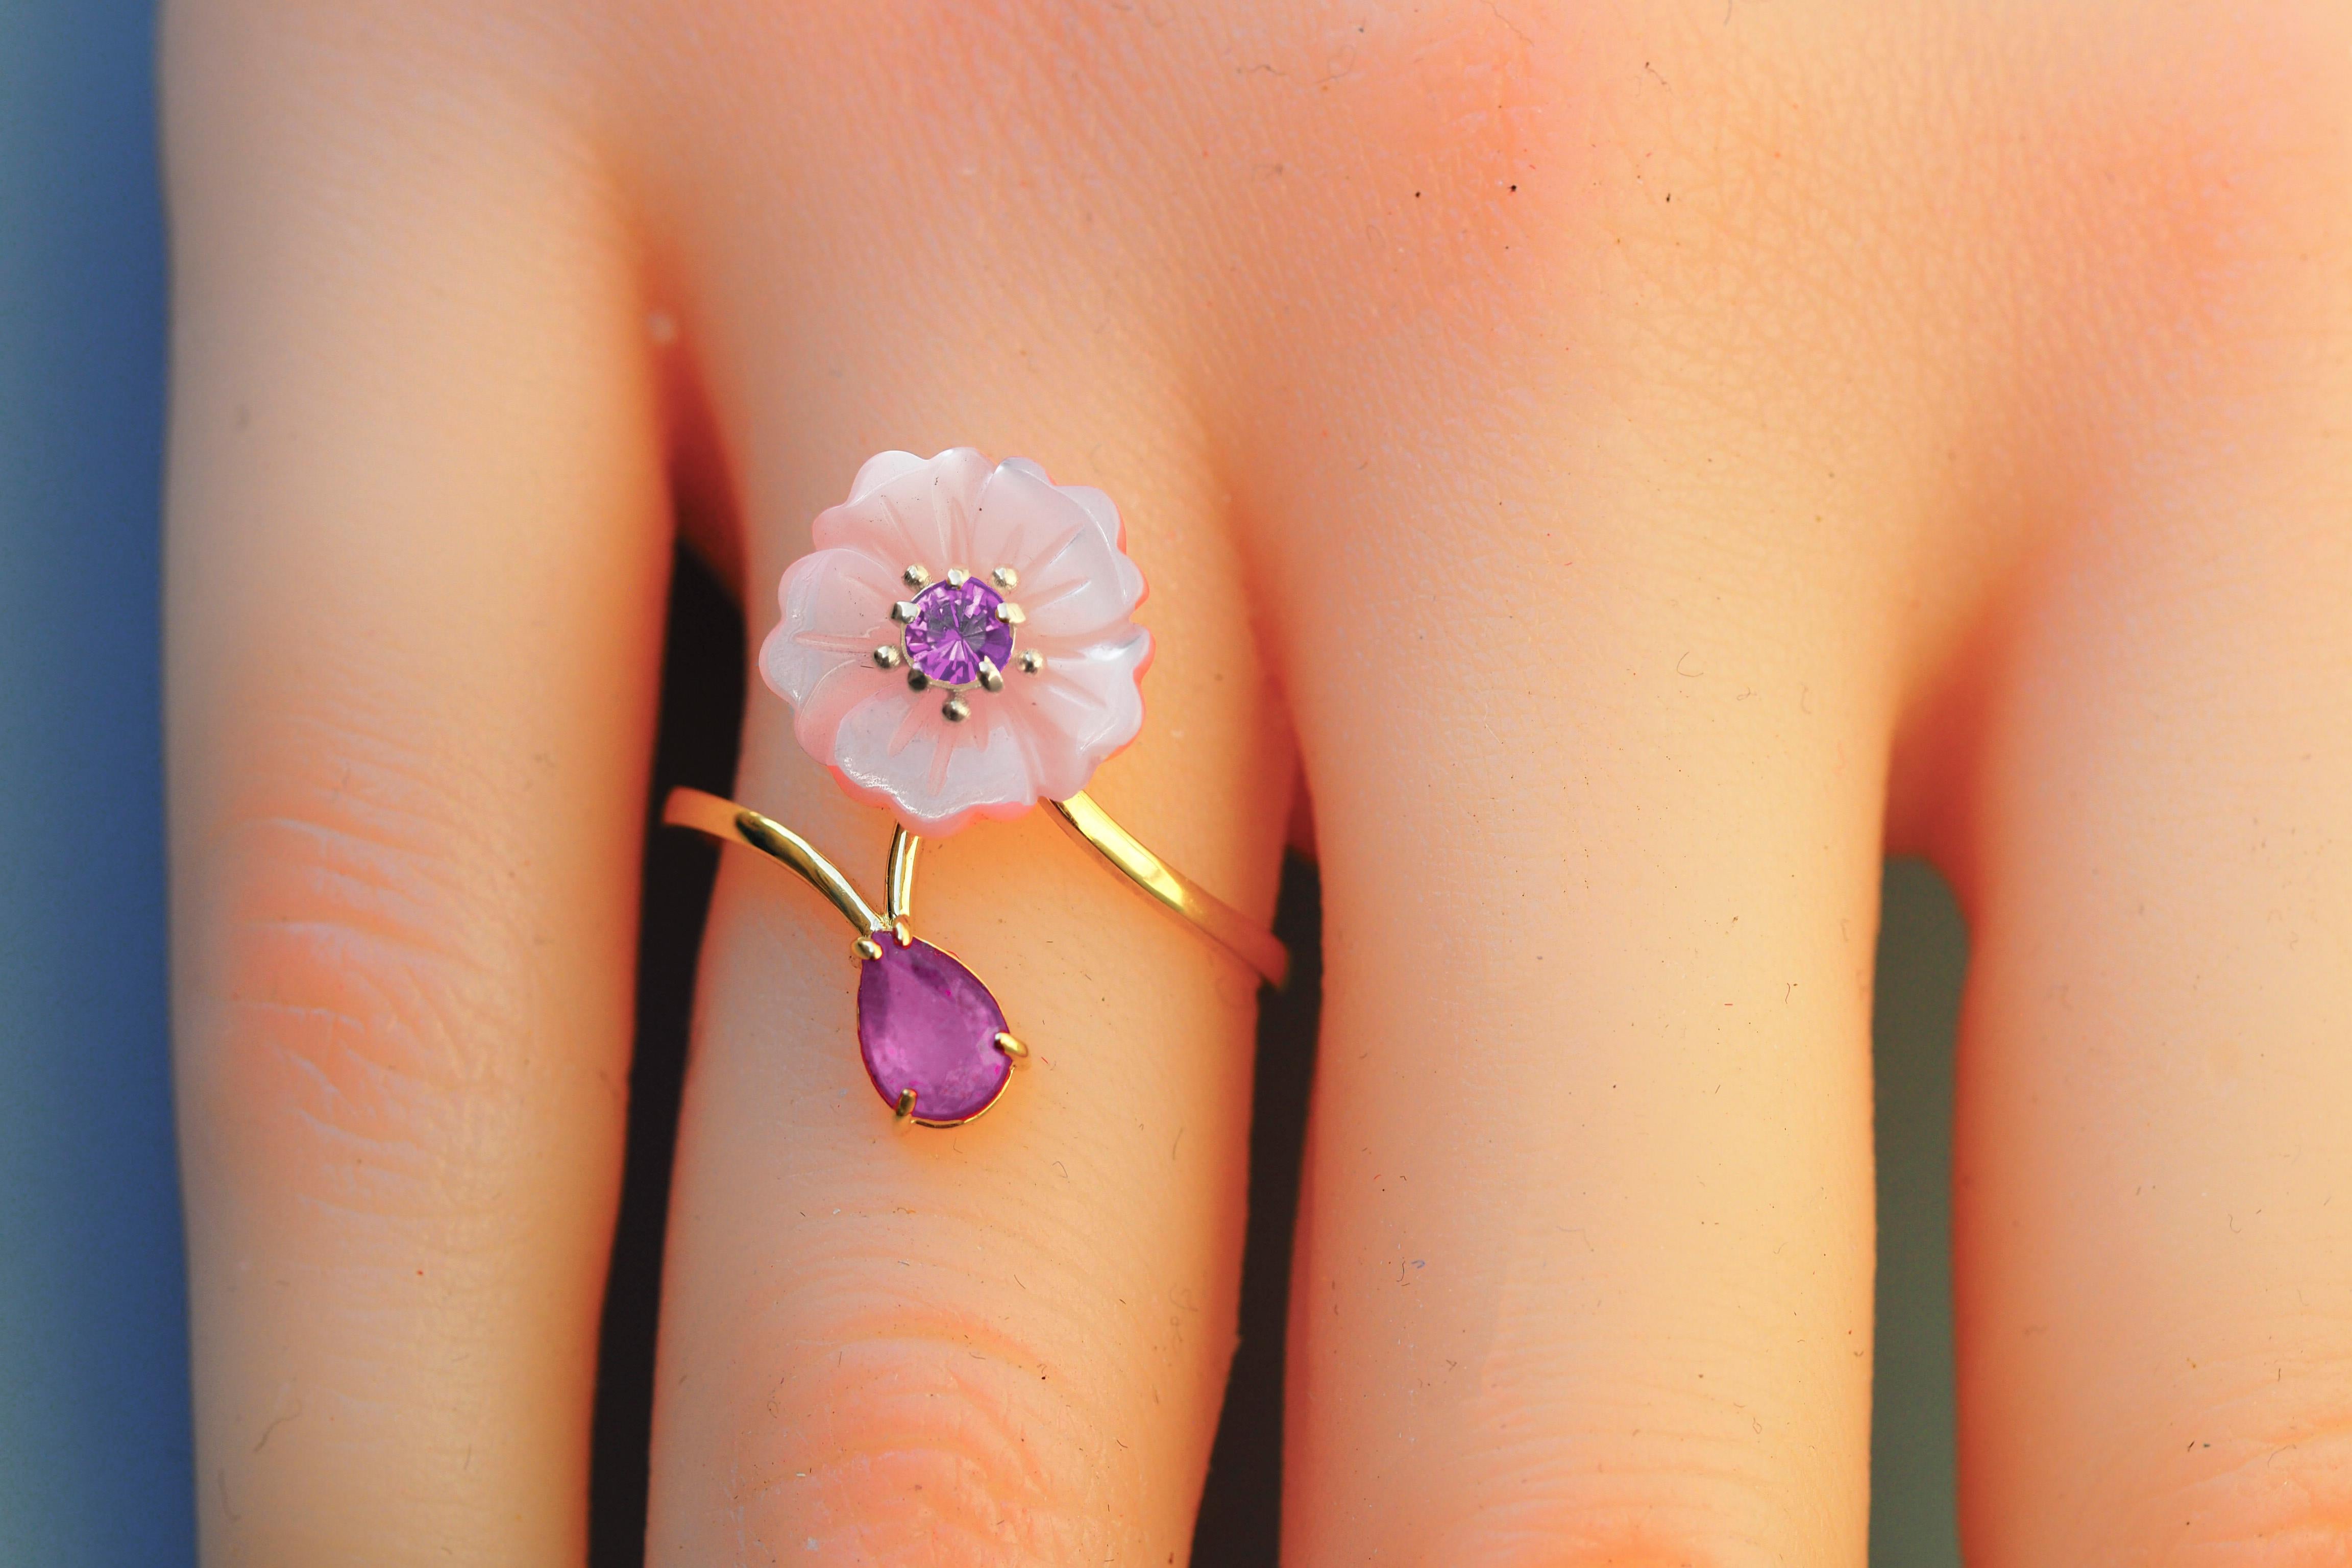 Carved Flower 14k ring with gemstones.
Lab amethyst ring in 14k gold. Carved mother of pearl flower ring. Flower gold ring. Amethyst vintage ring. Nature inspired ring with mother of pearl flower. Shell flower ring.

Metal: 14k solid gold
Weight: